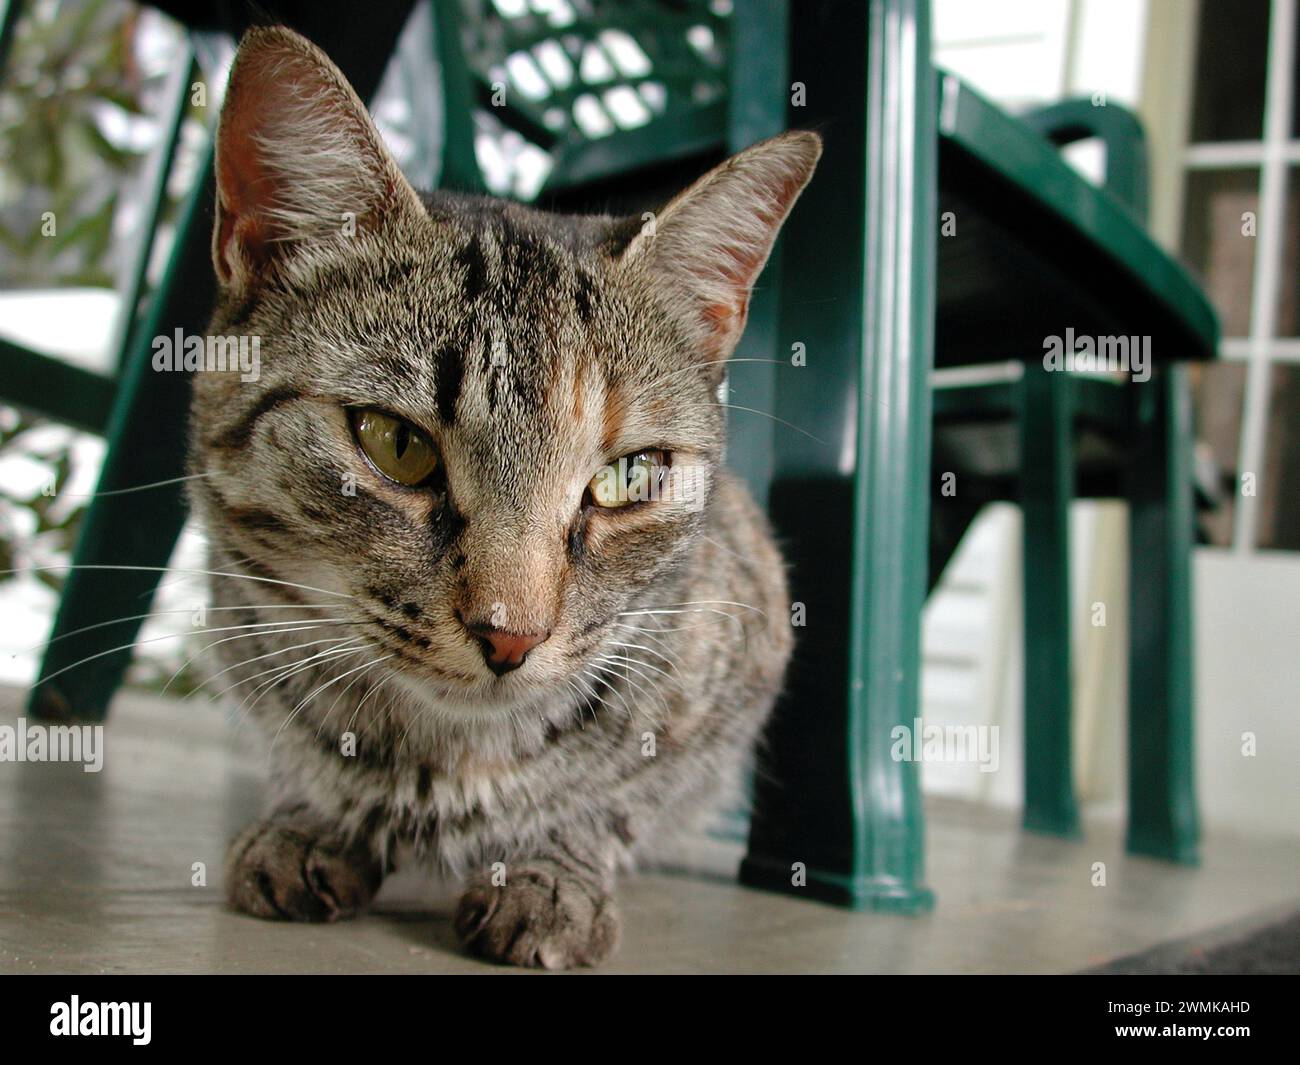 Domestic cat sitting under a garden chair Stock Photo